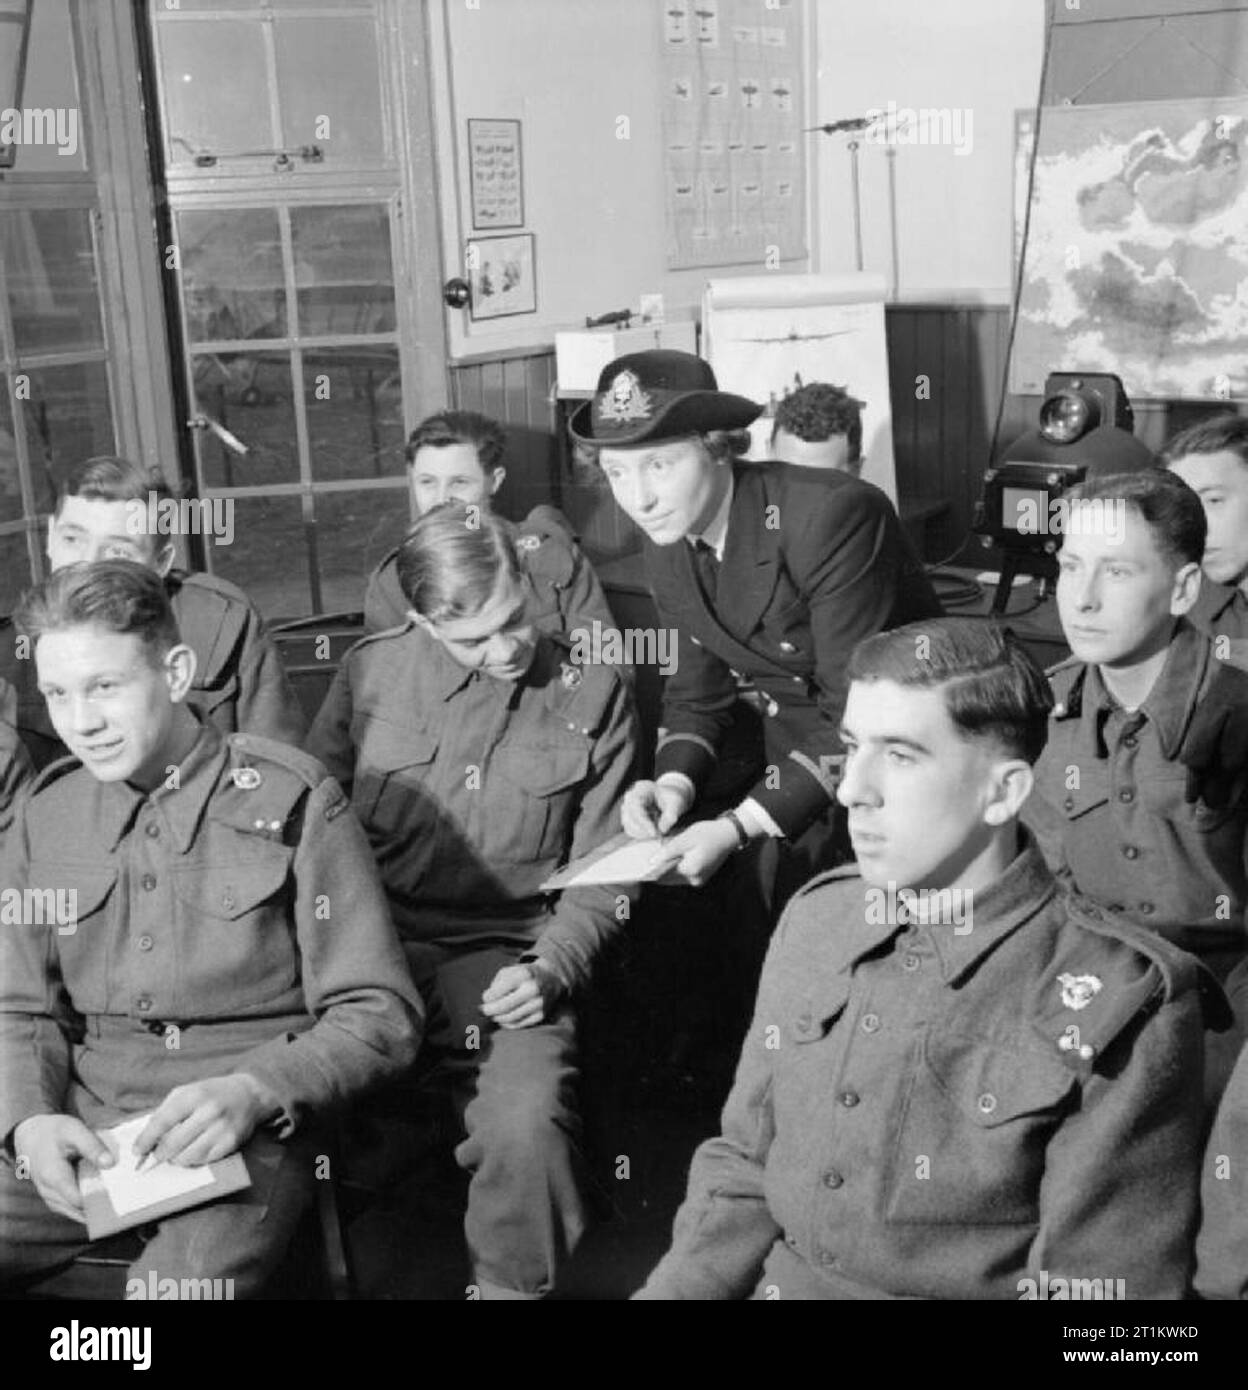 Women's Royal Naval Service- With the Fleet Air Arm, Scotland, 1943 Third Officer Ingledew, WRNS, encourages gunners of the Station Defence to draw various aircraft types from memory as part of her daily hour-long lecture on aircraft recognition. The epidiascope used to project pictures of aircraft onto the screen as part of this class can be seen in the background. Drawings are judged on the recognition of outstanding features of all aircraft types, not on artistic merit! According to the original caption, a similar course is being considered for Fleet Air Arm personnel on the recognition of Stock Photo